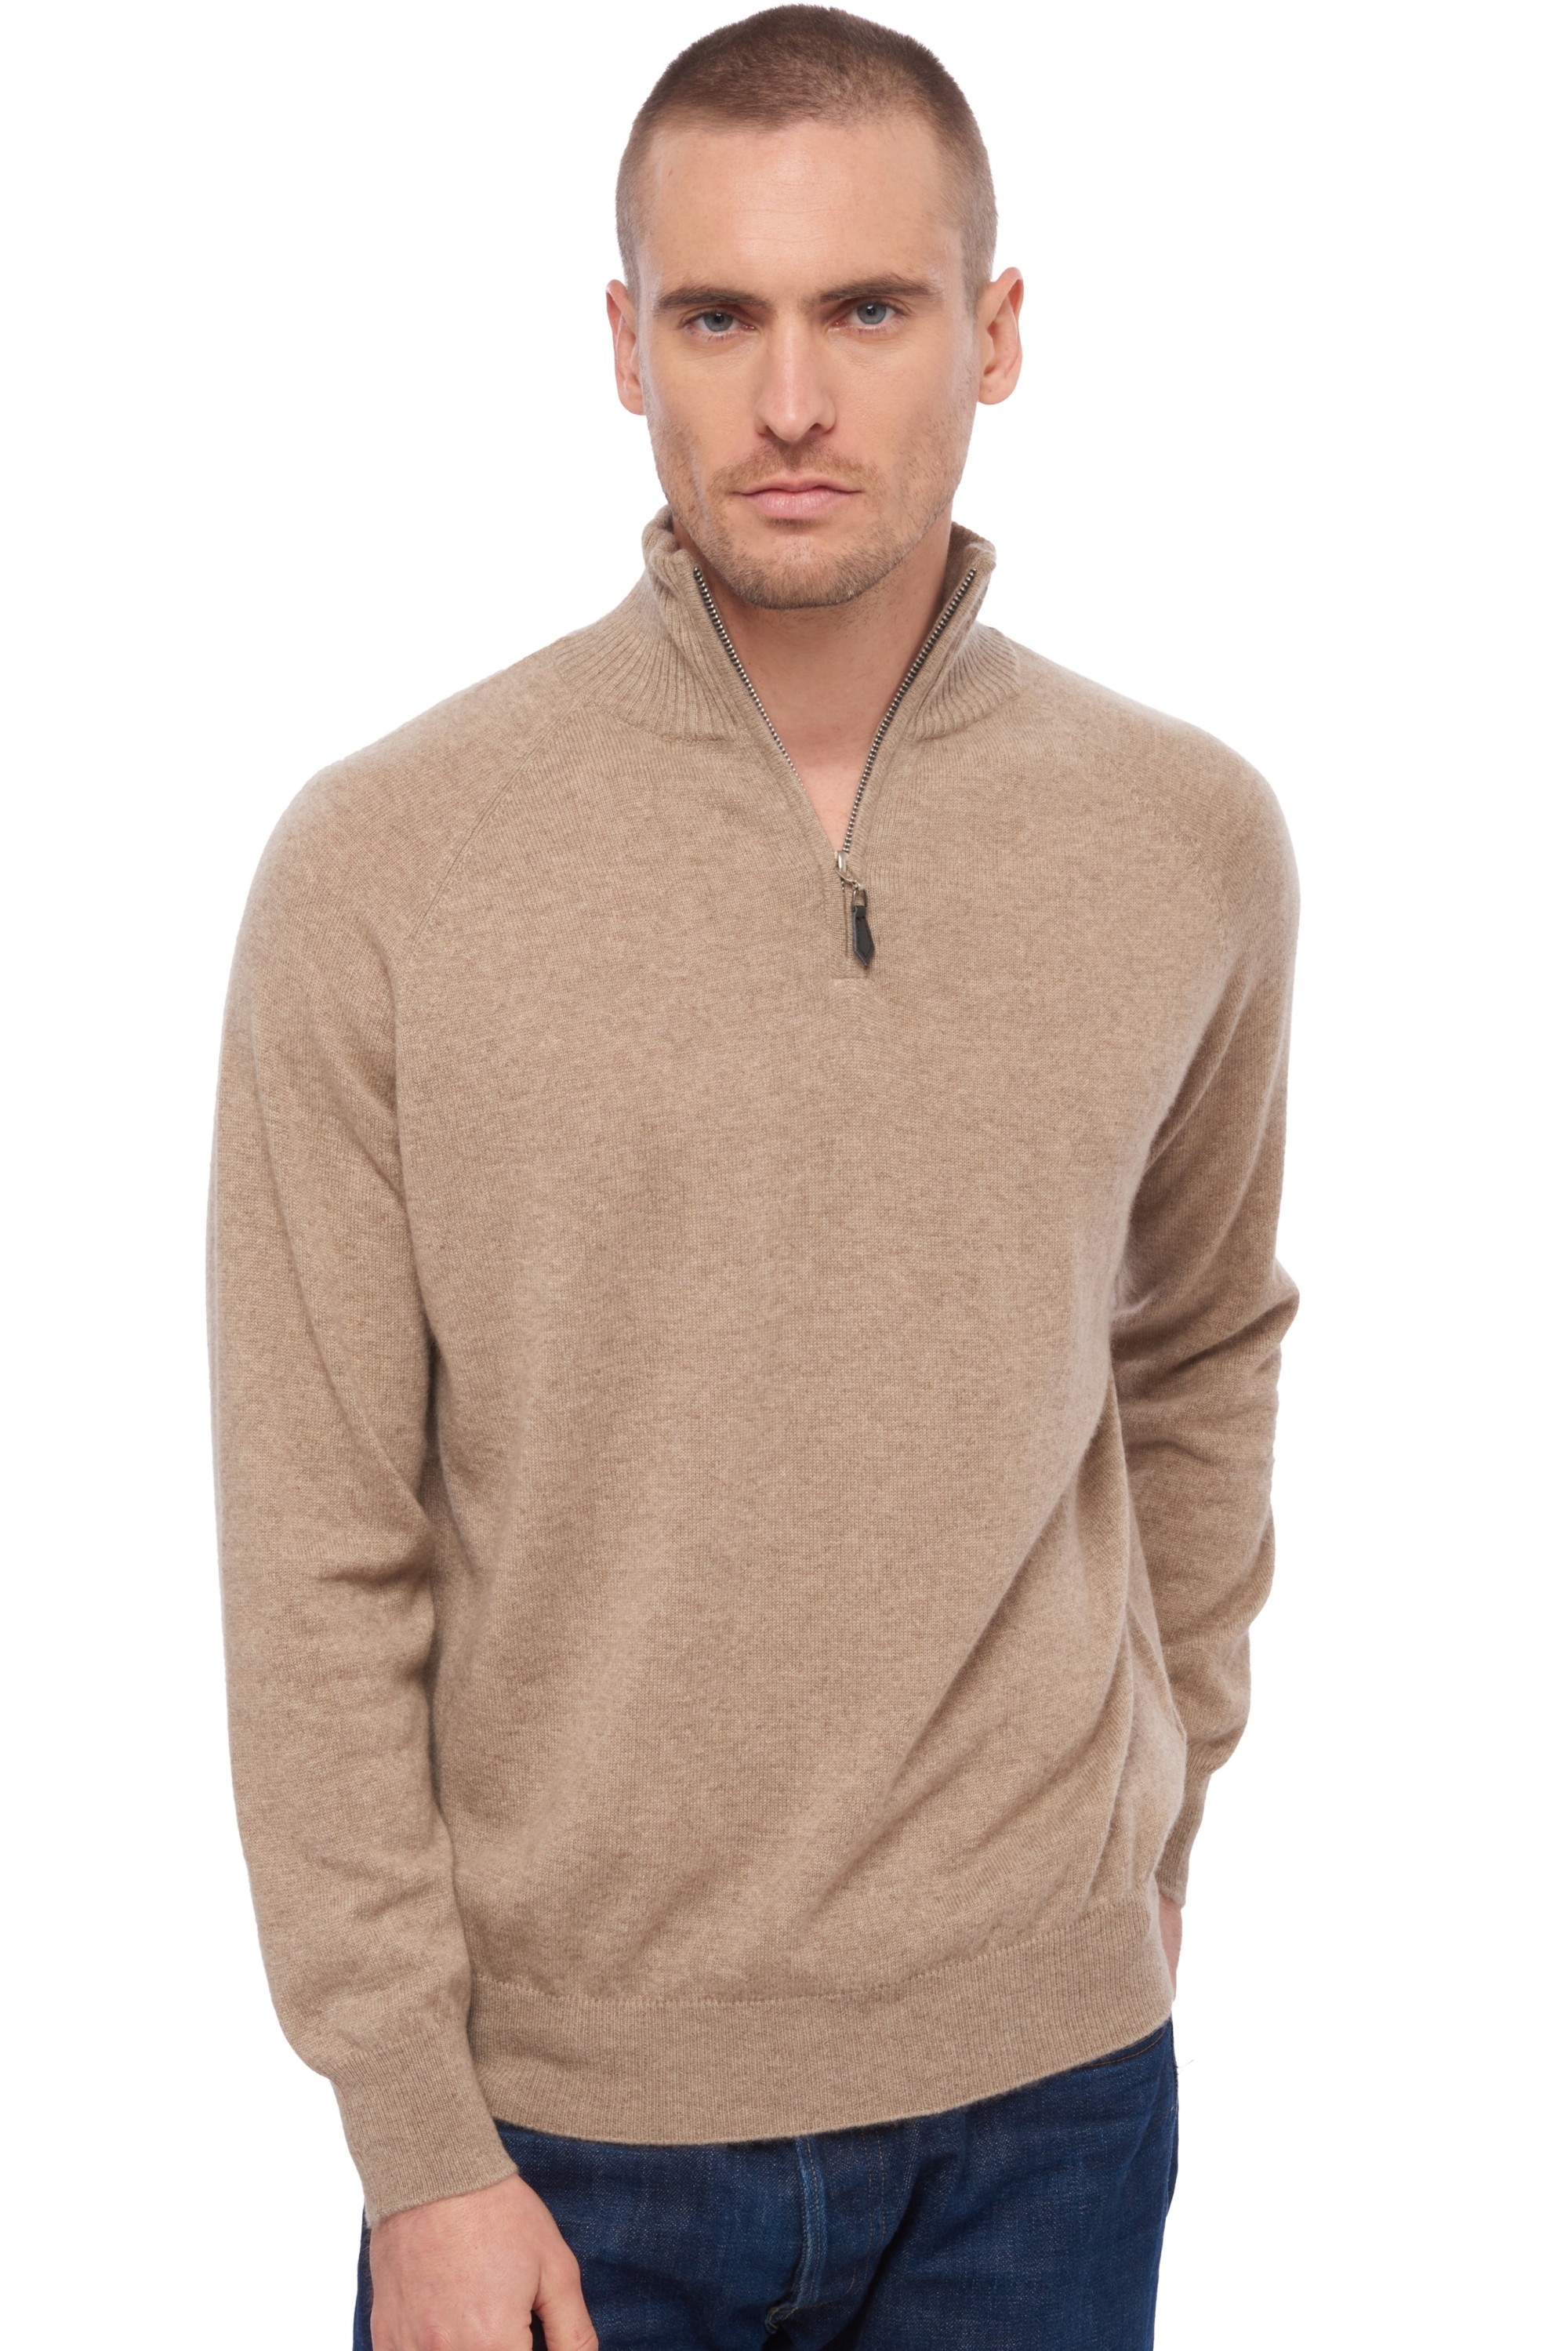 Cachemire pull homme natural vez natural brown m